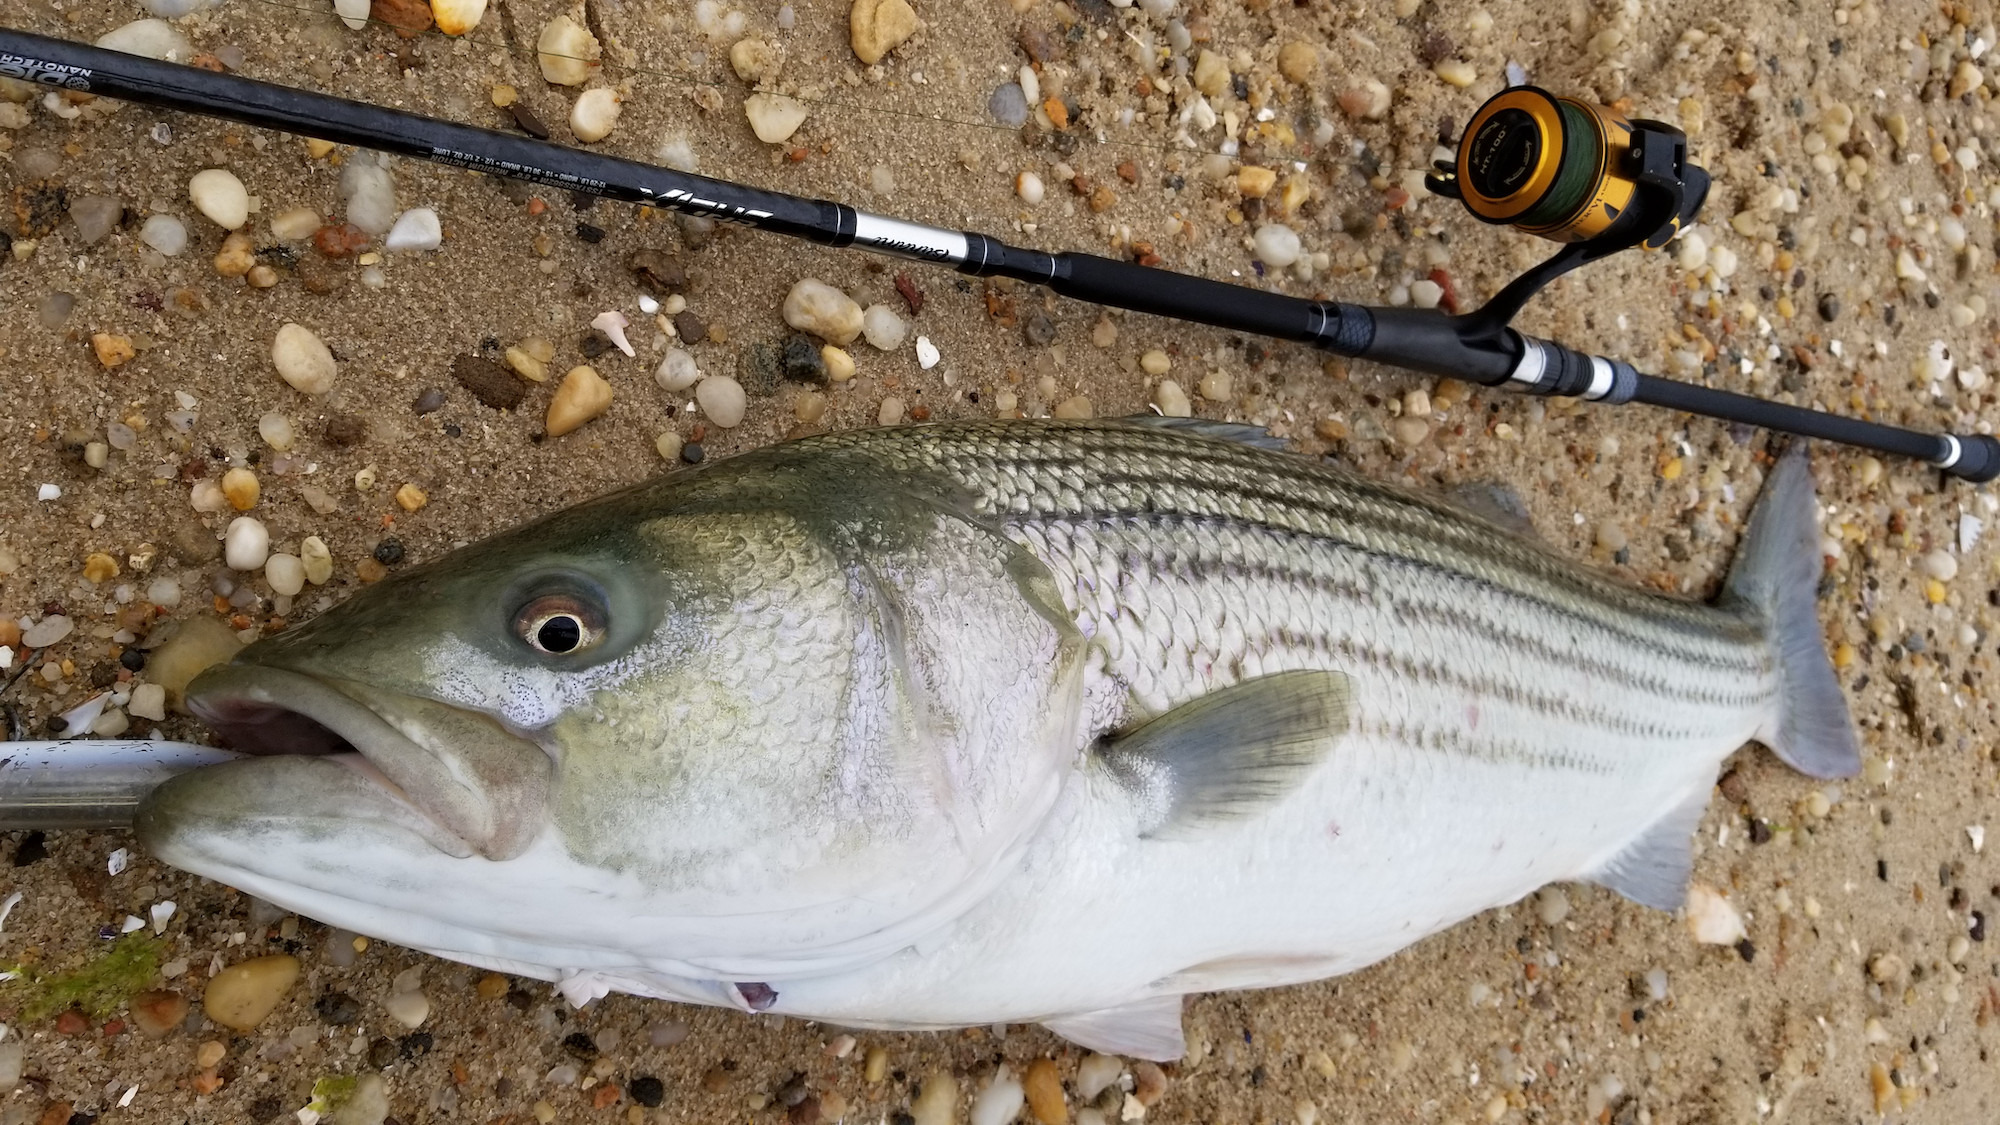 A striper fish next to a black fishing rod attached to a orange and black Spinfisher spinning reel